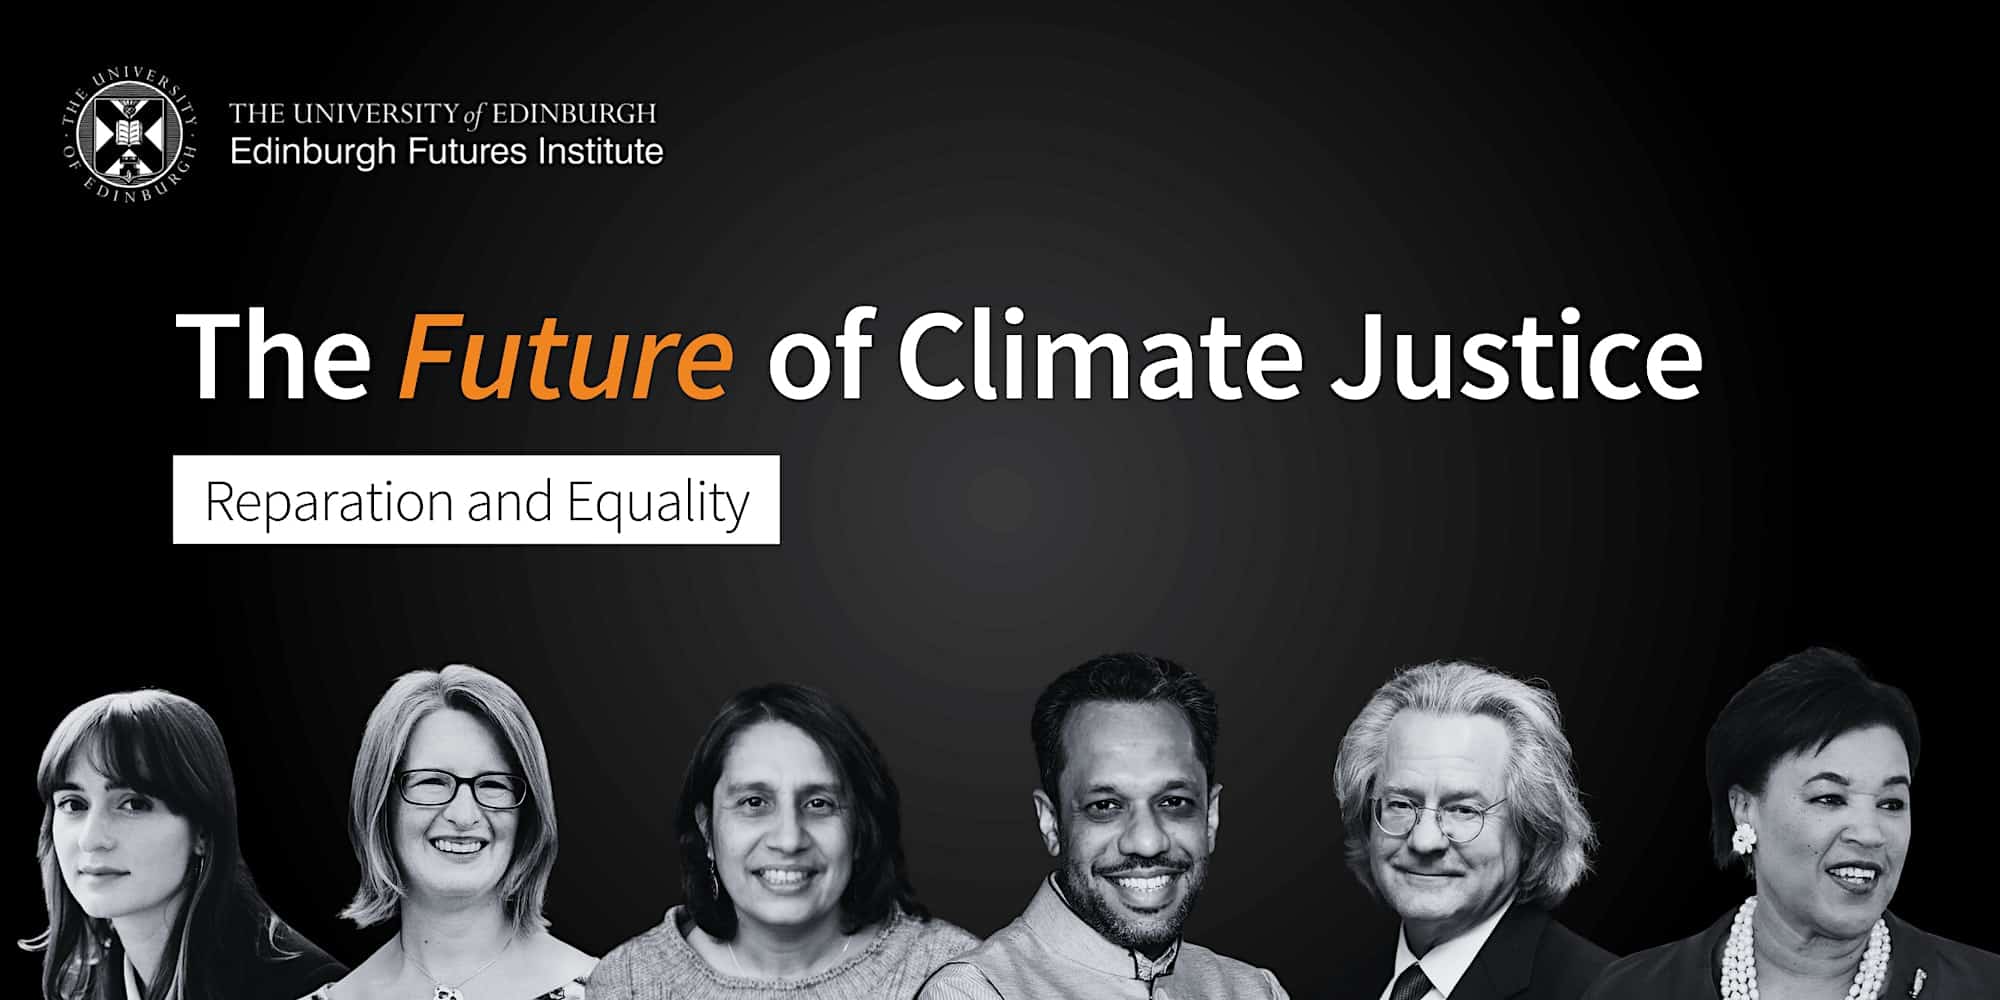 Image text reads: 'The Future of Climate Justice - The Future of Climate Justice, Reparation and Equality. With logo of Edinburgh Futures Institute, part of the Edinburgh Futures Conversations series. Includes headshots of panelists.